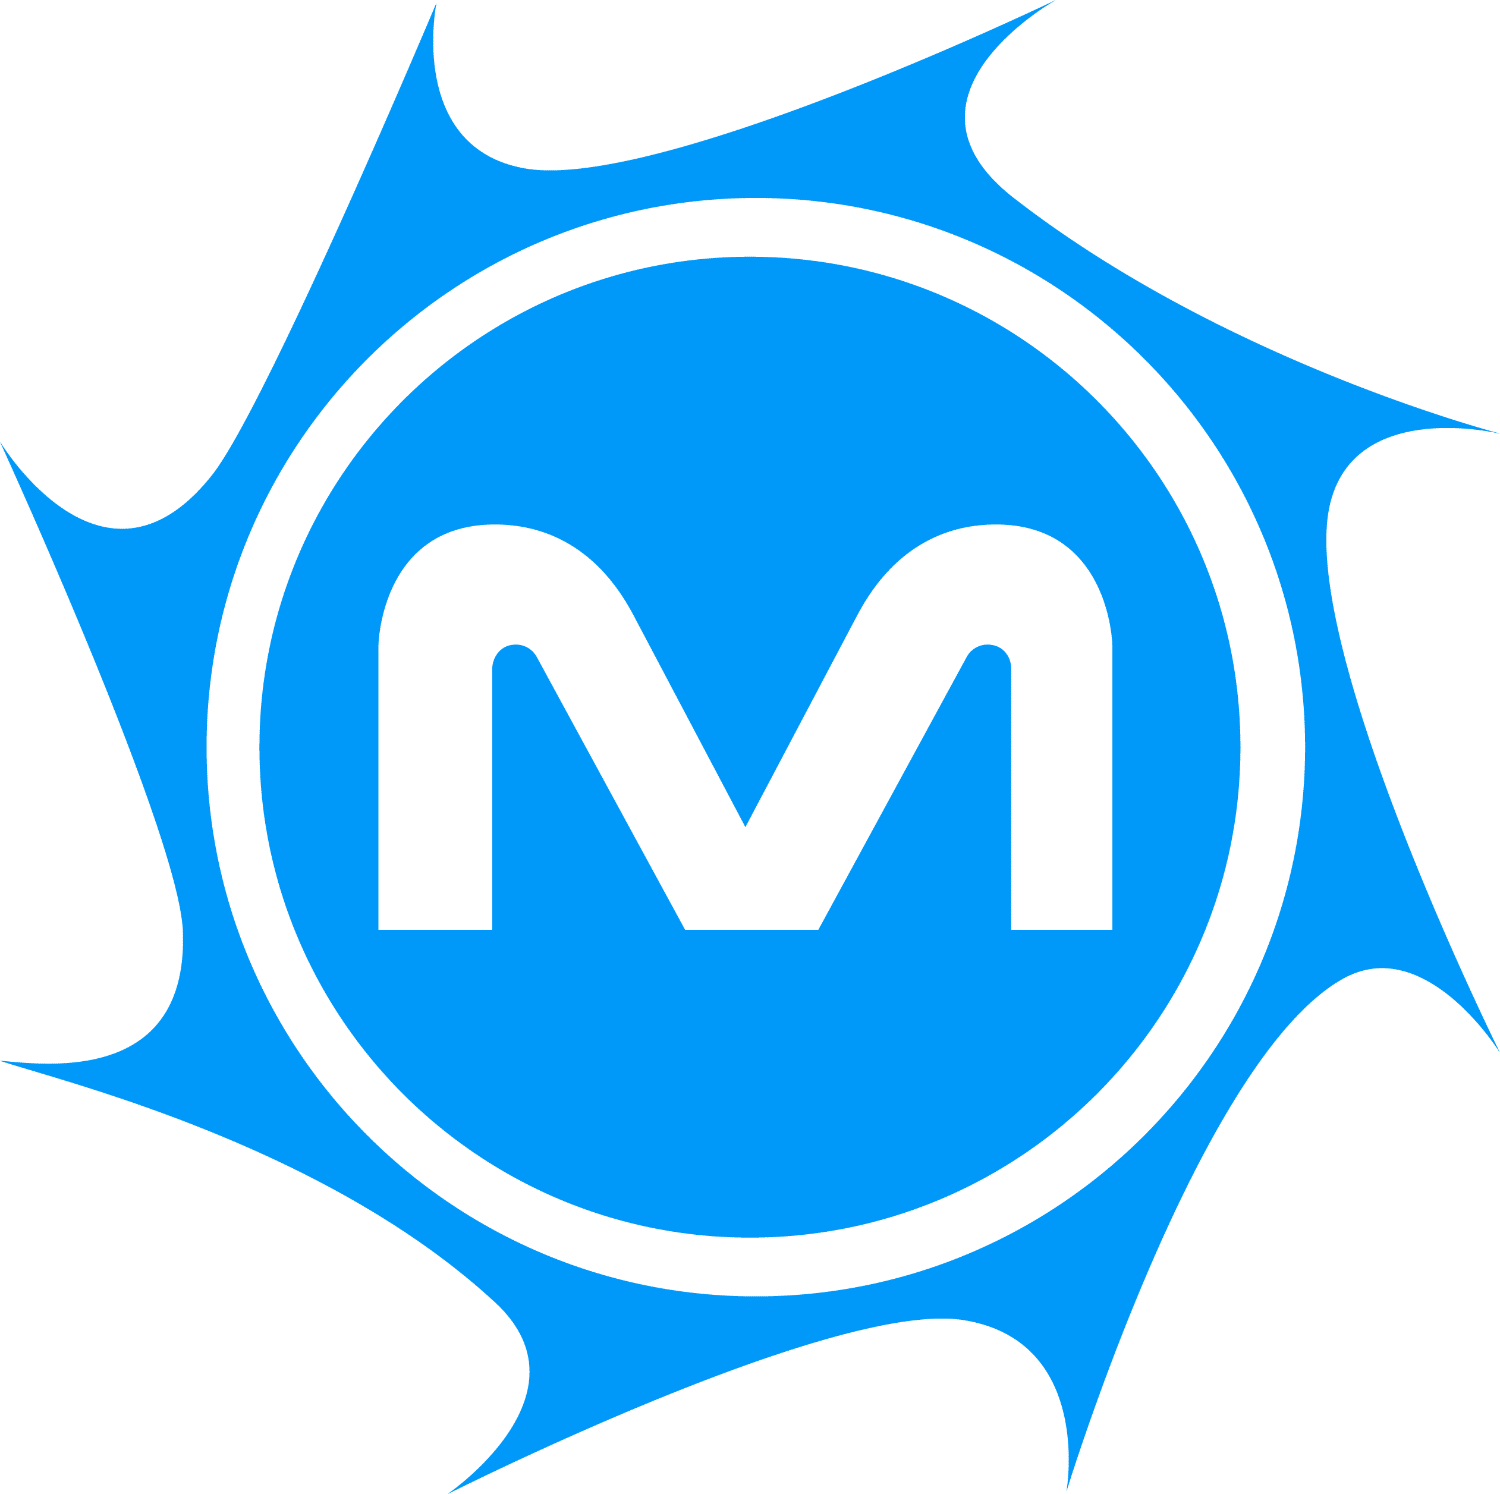 A blue sun icon with 8 points and an "m" cut out of the middle